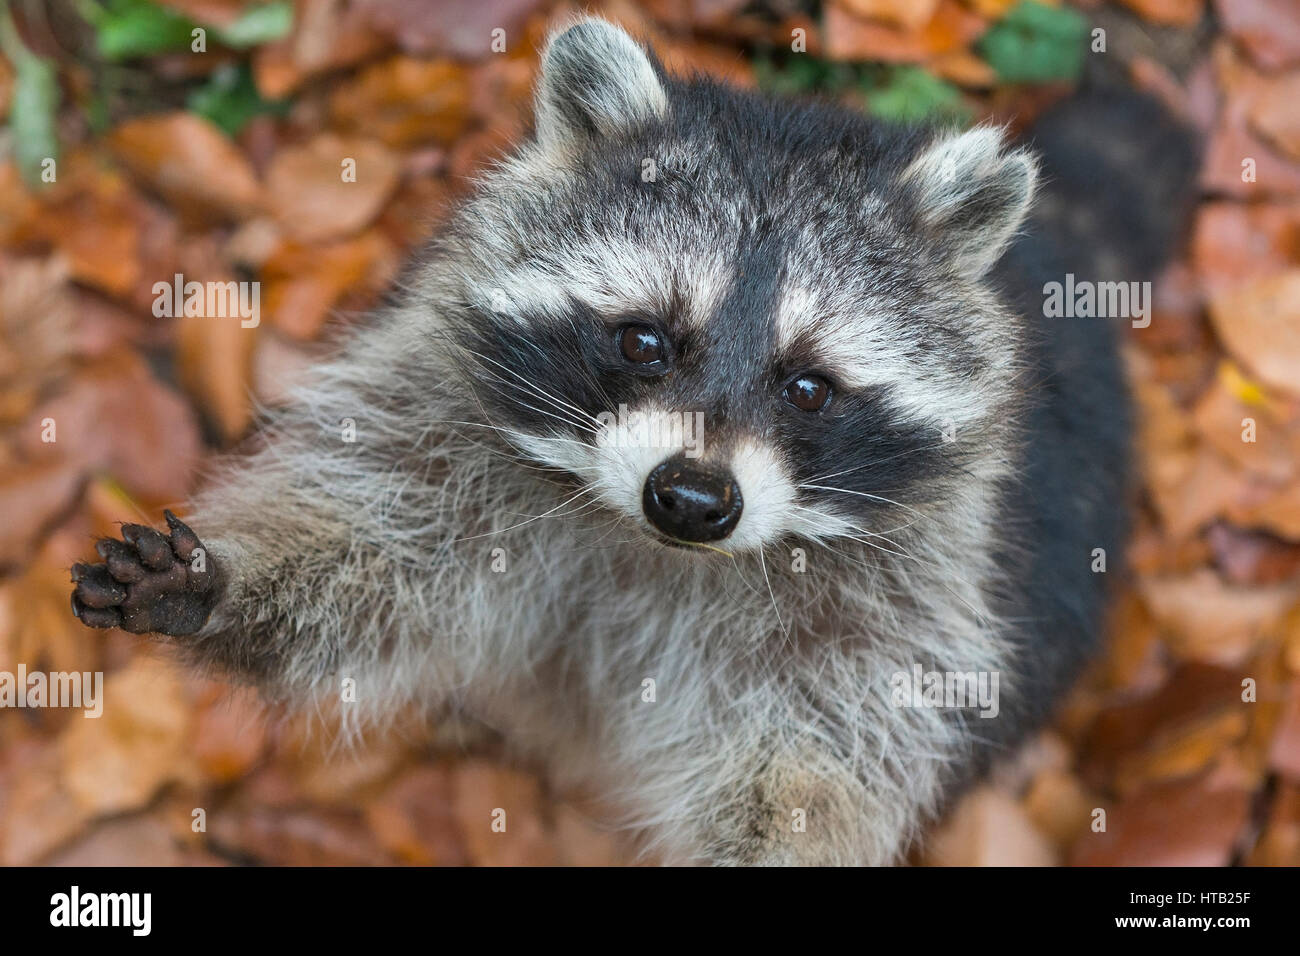 Racoon sits in the tree, Racoon, Procyon lotor, racoon, Waschbaer sitzt im Baum, Procyon lotor,, Waschbaer Stock Photo